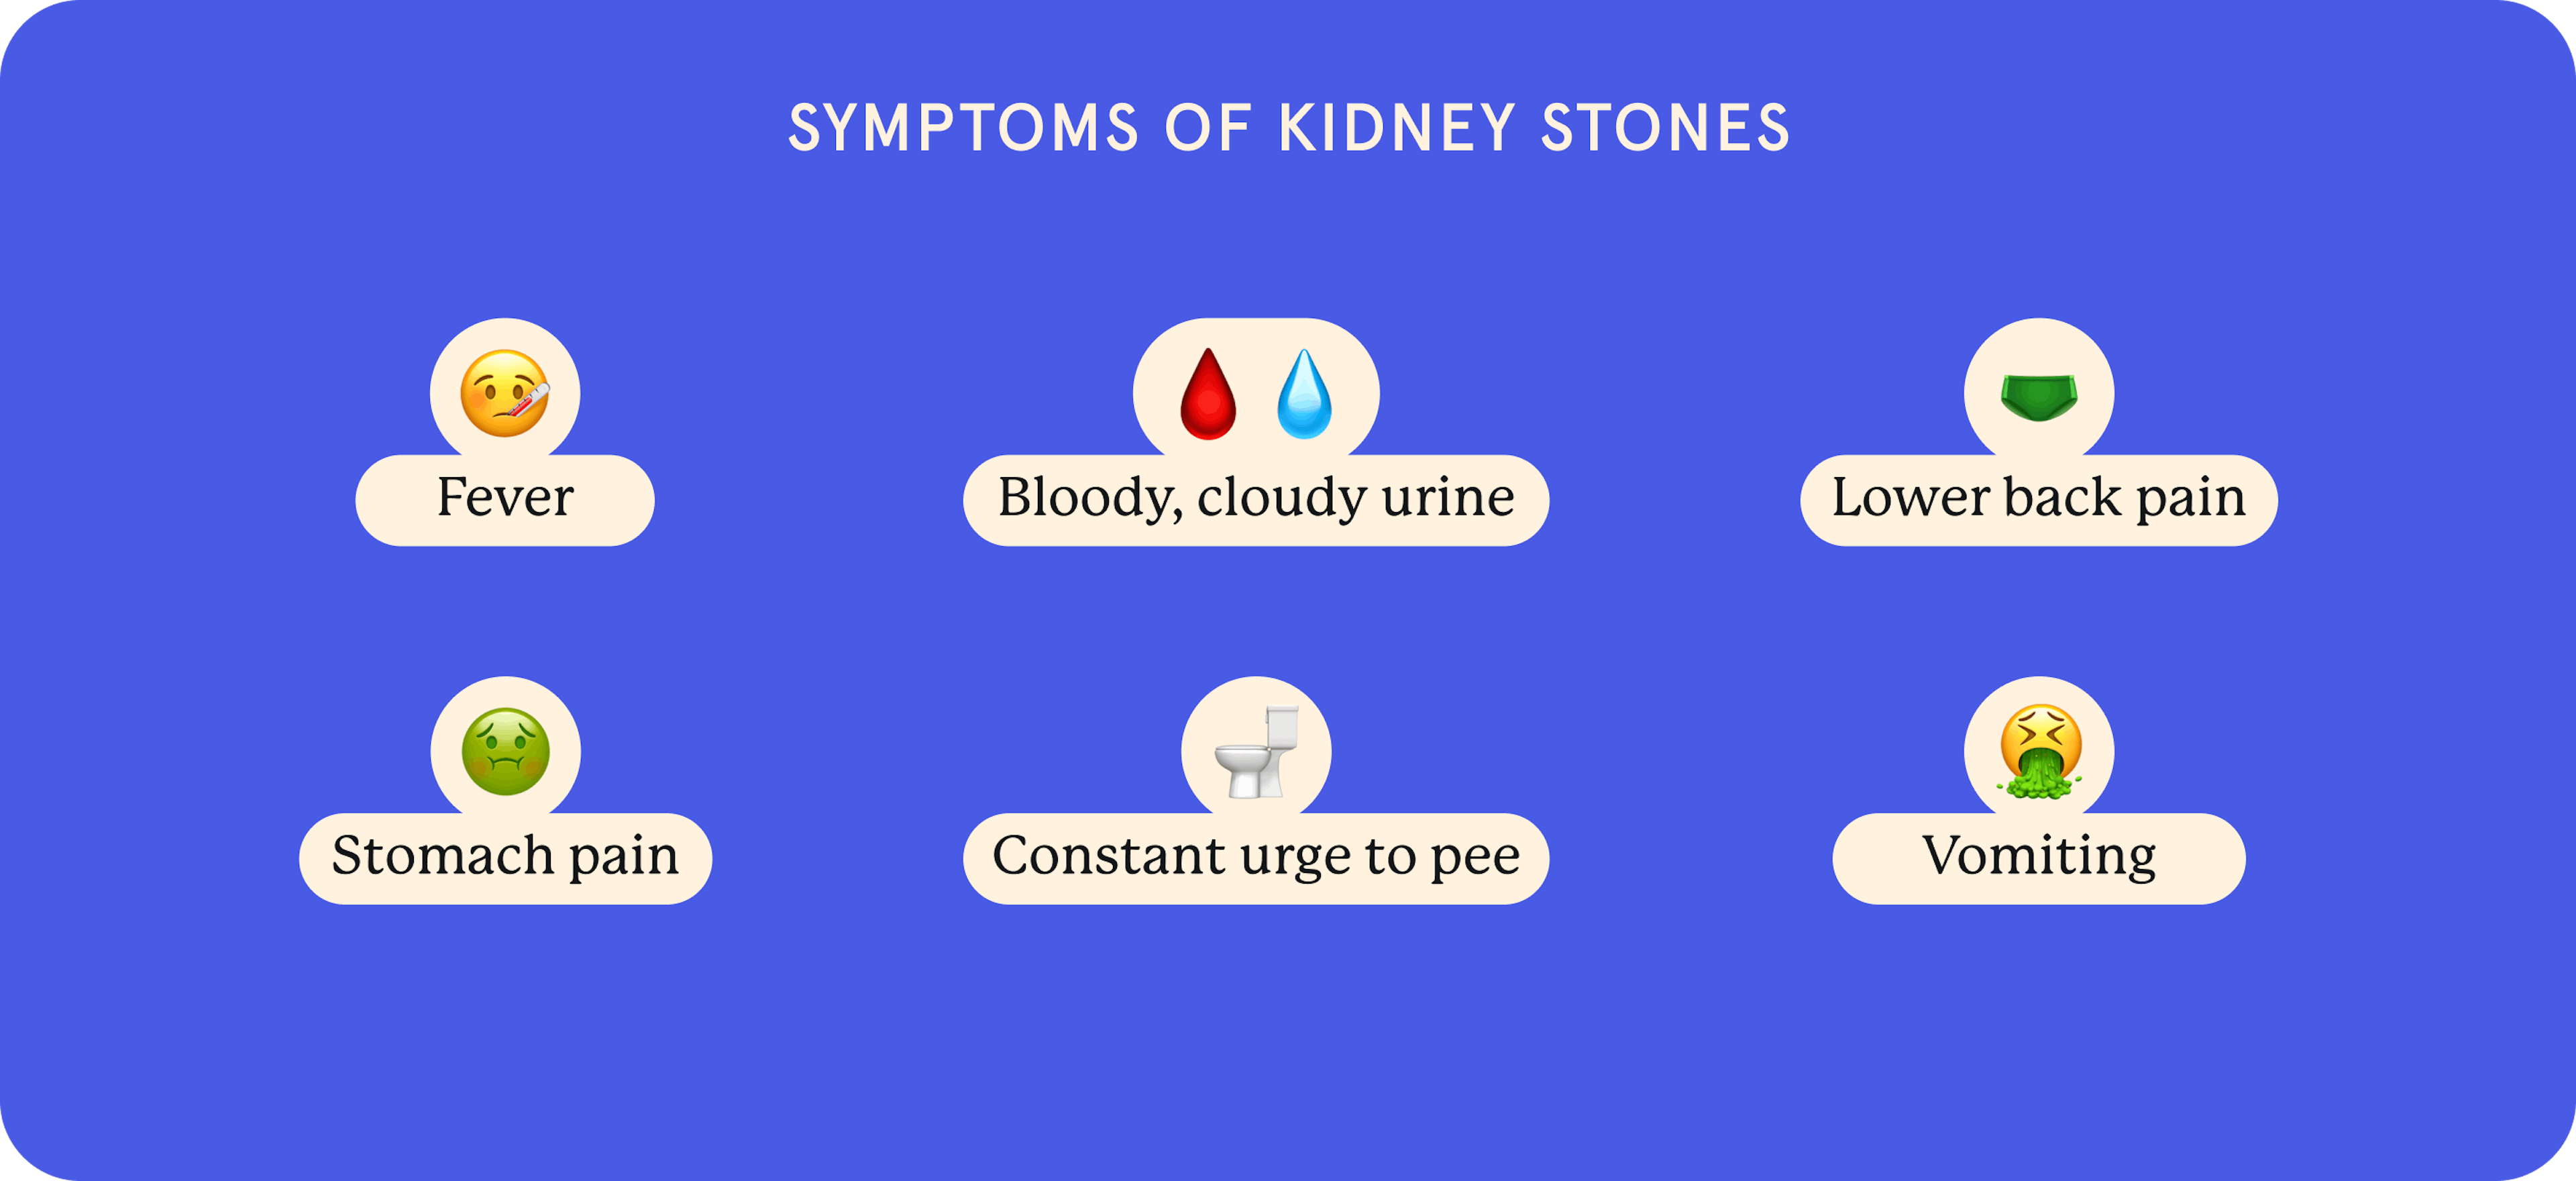 An infographic made using emojis depicting the symptoms of kidney stones